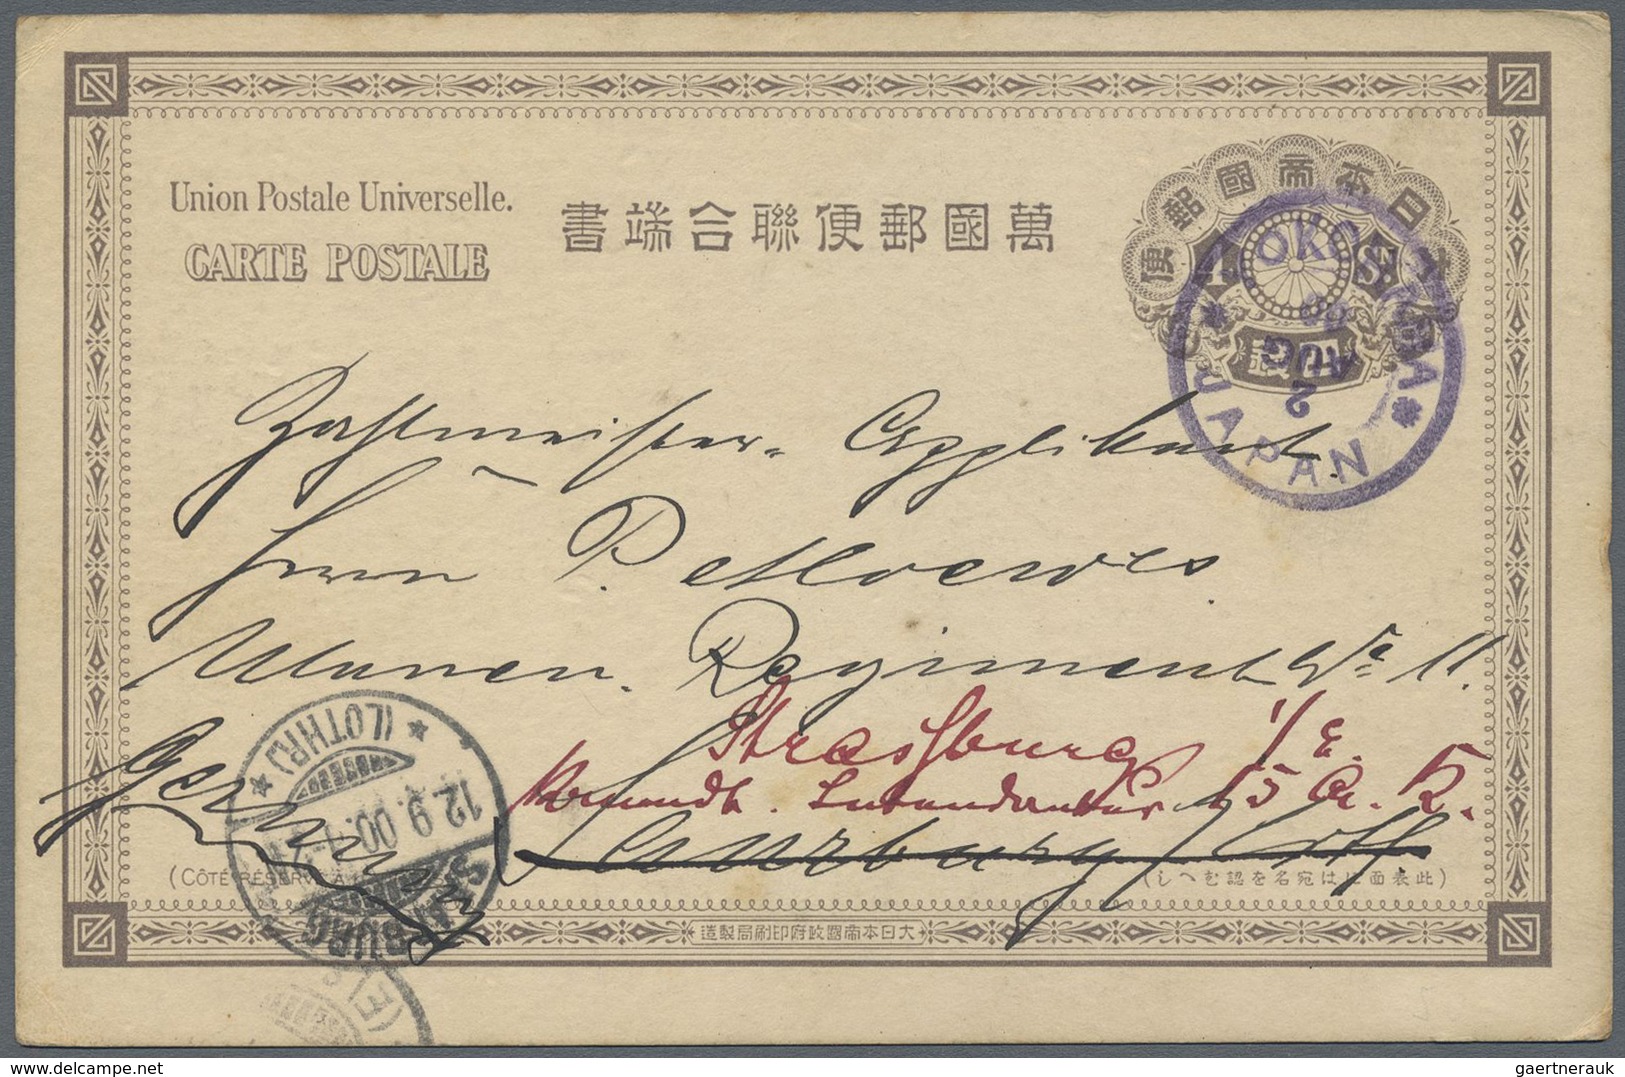 GA/Br Japan: 1883/2007 (ca.), used stationery (51) or ppc (40), often to Thailand and undeliverable with r